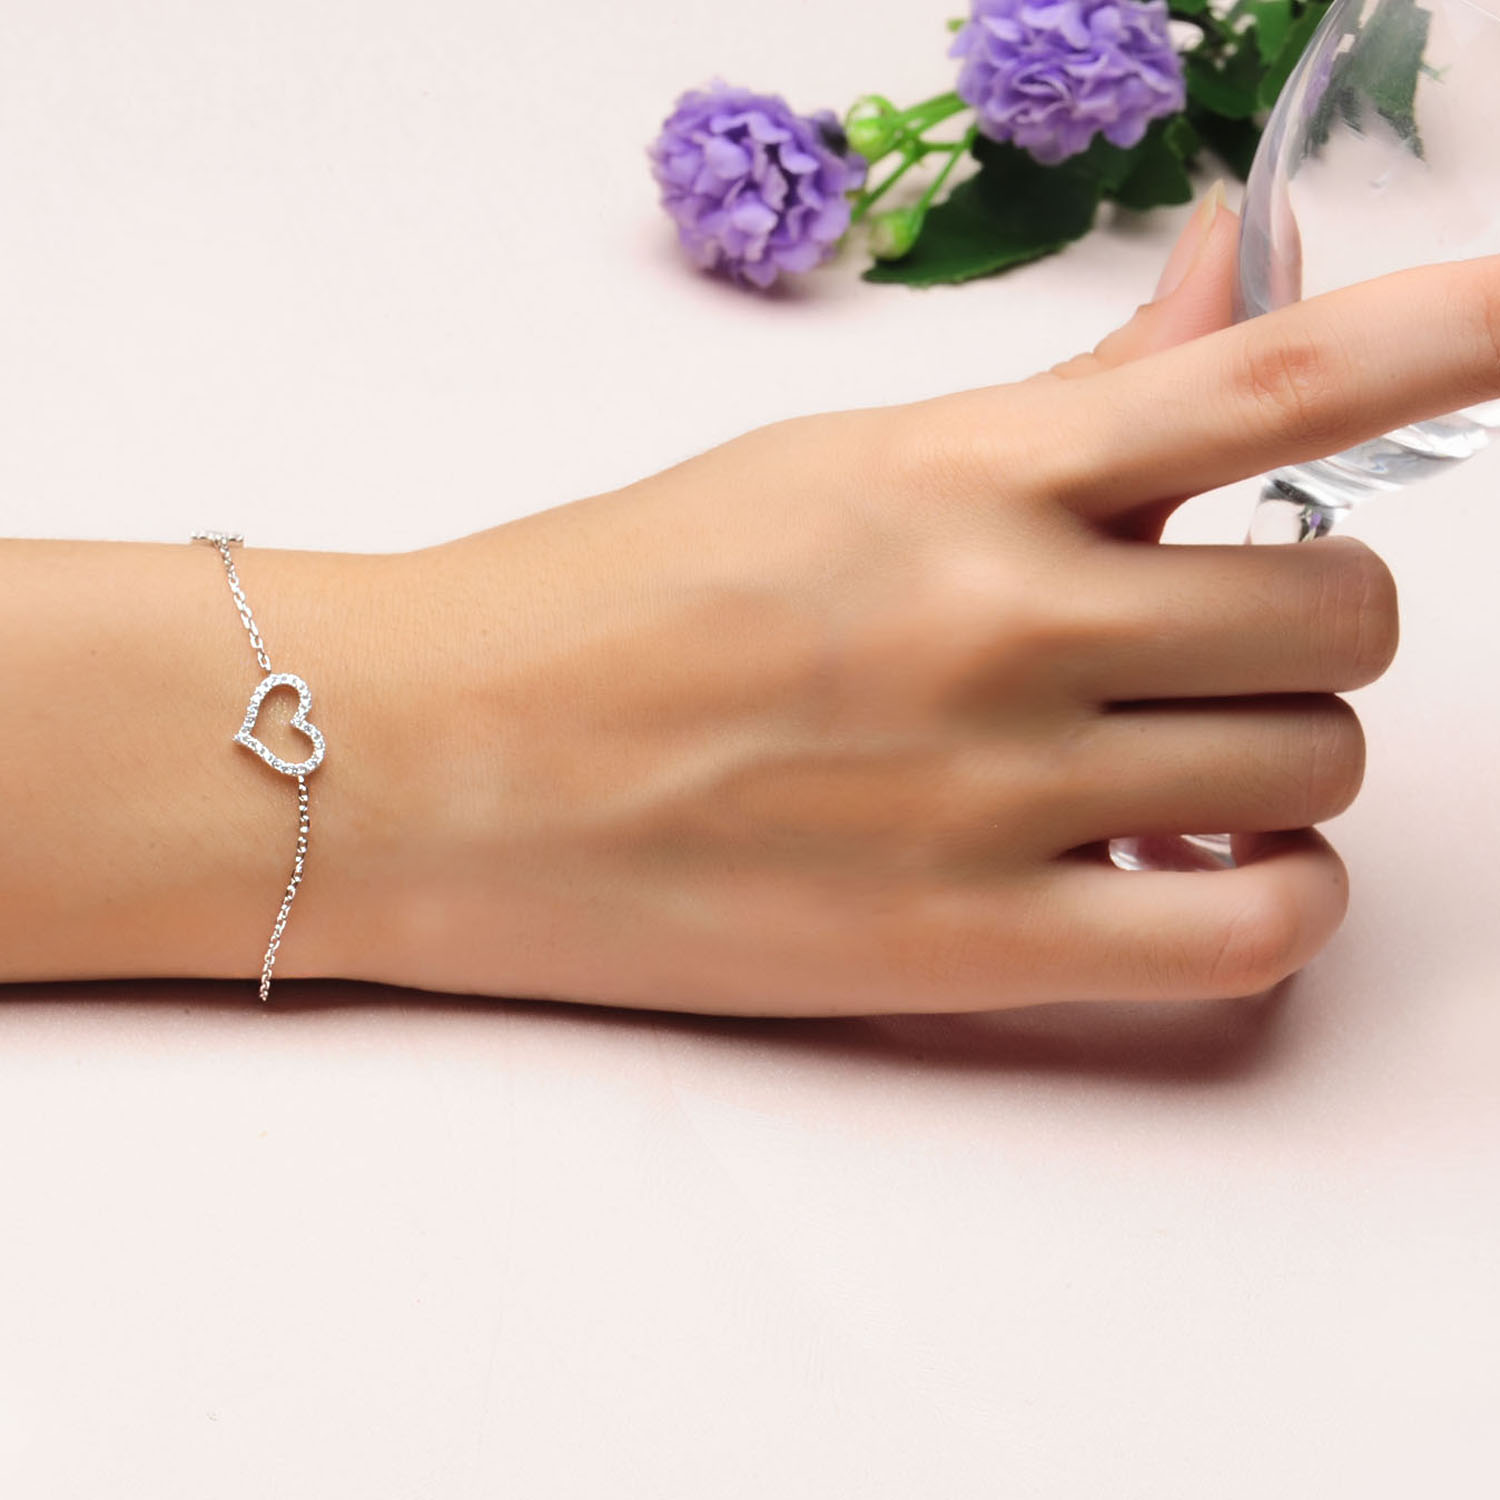 Fashion Cross Heart Shaped 925 Sterling Silver Bracelet Bangle Anniversary High Quality Jewelry Gift(图2)